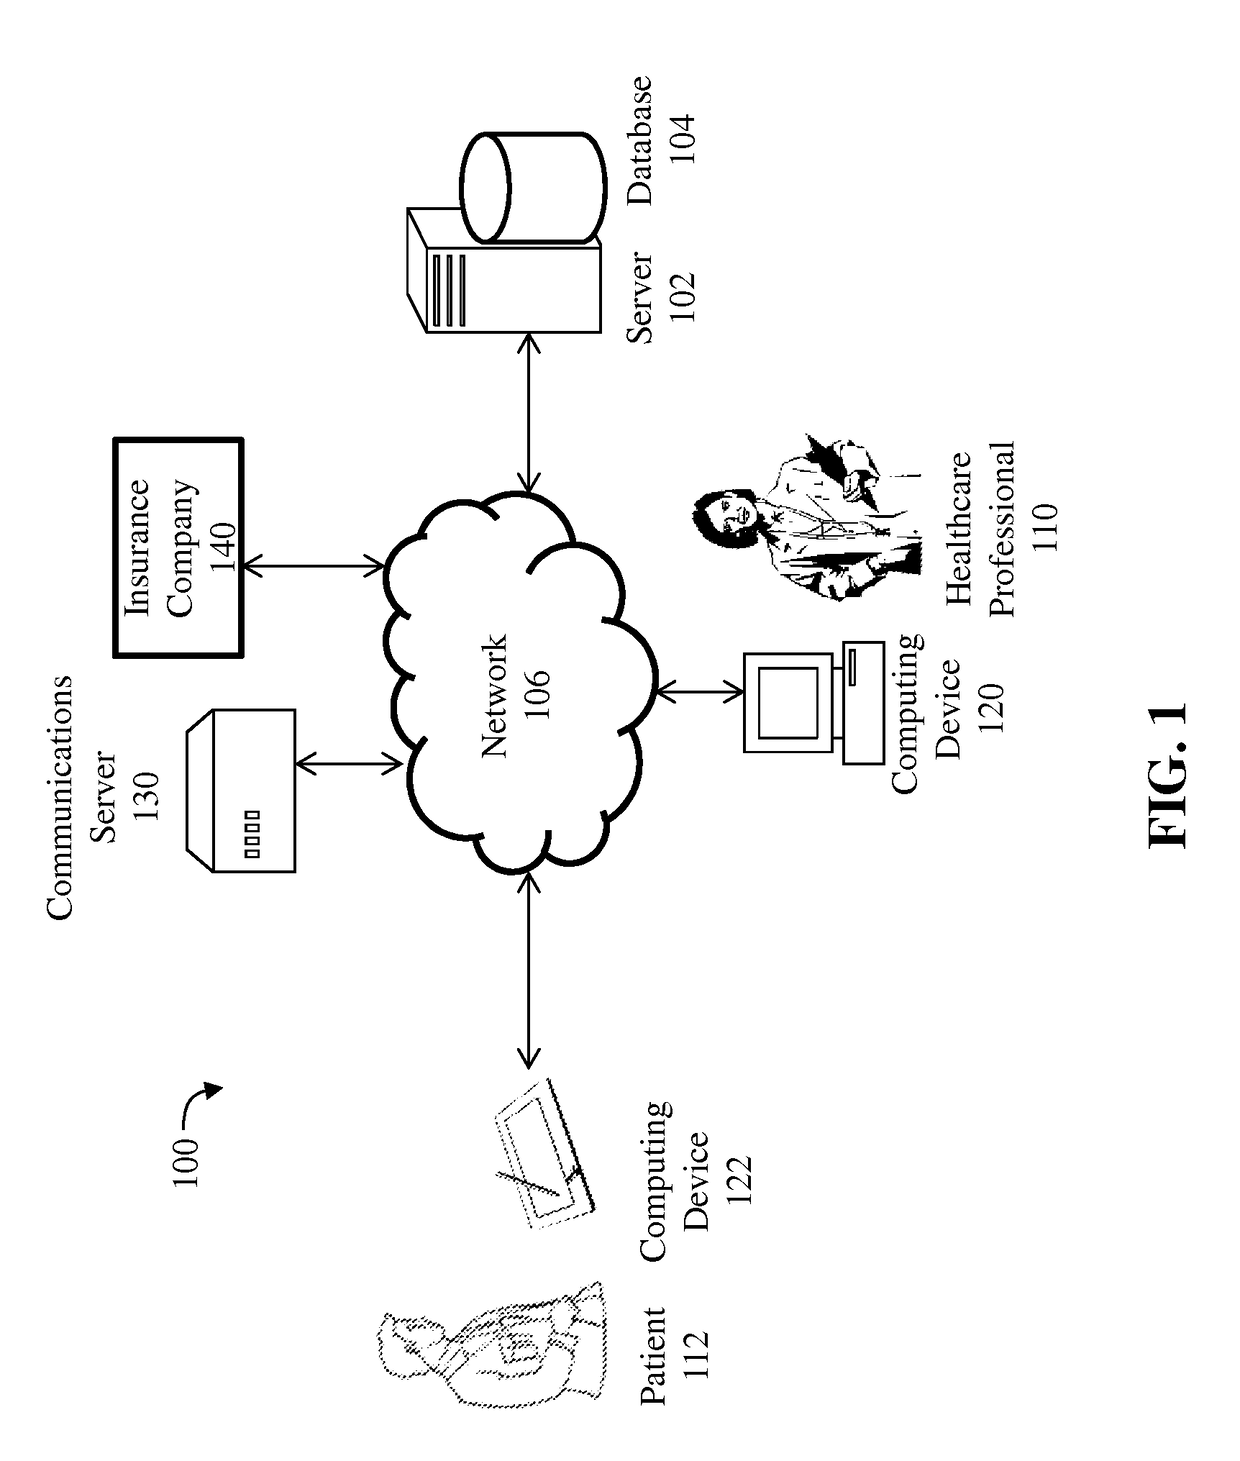 Detection of adverse reactions to medication using a communications network